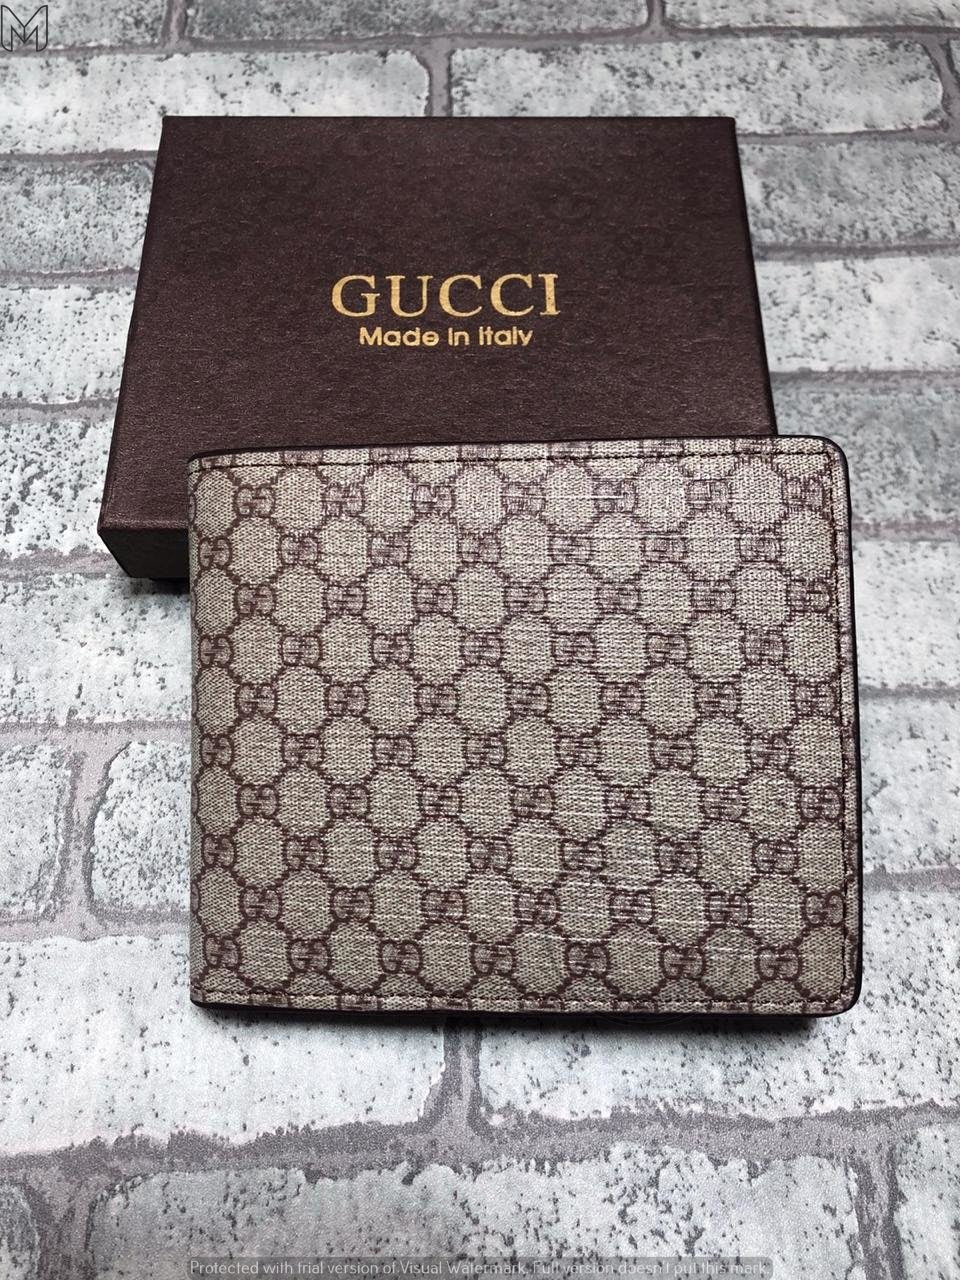 Gucci Made in Italy Brown Color Men's Wallet for Man GU-W-02 Multicolor Leather Gift wallet